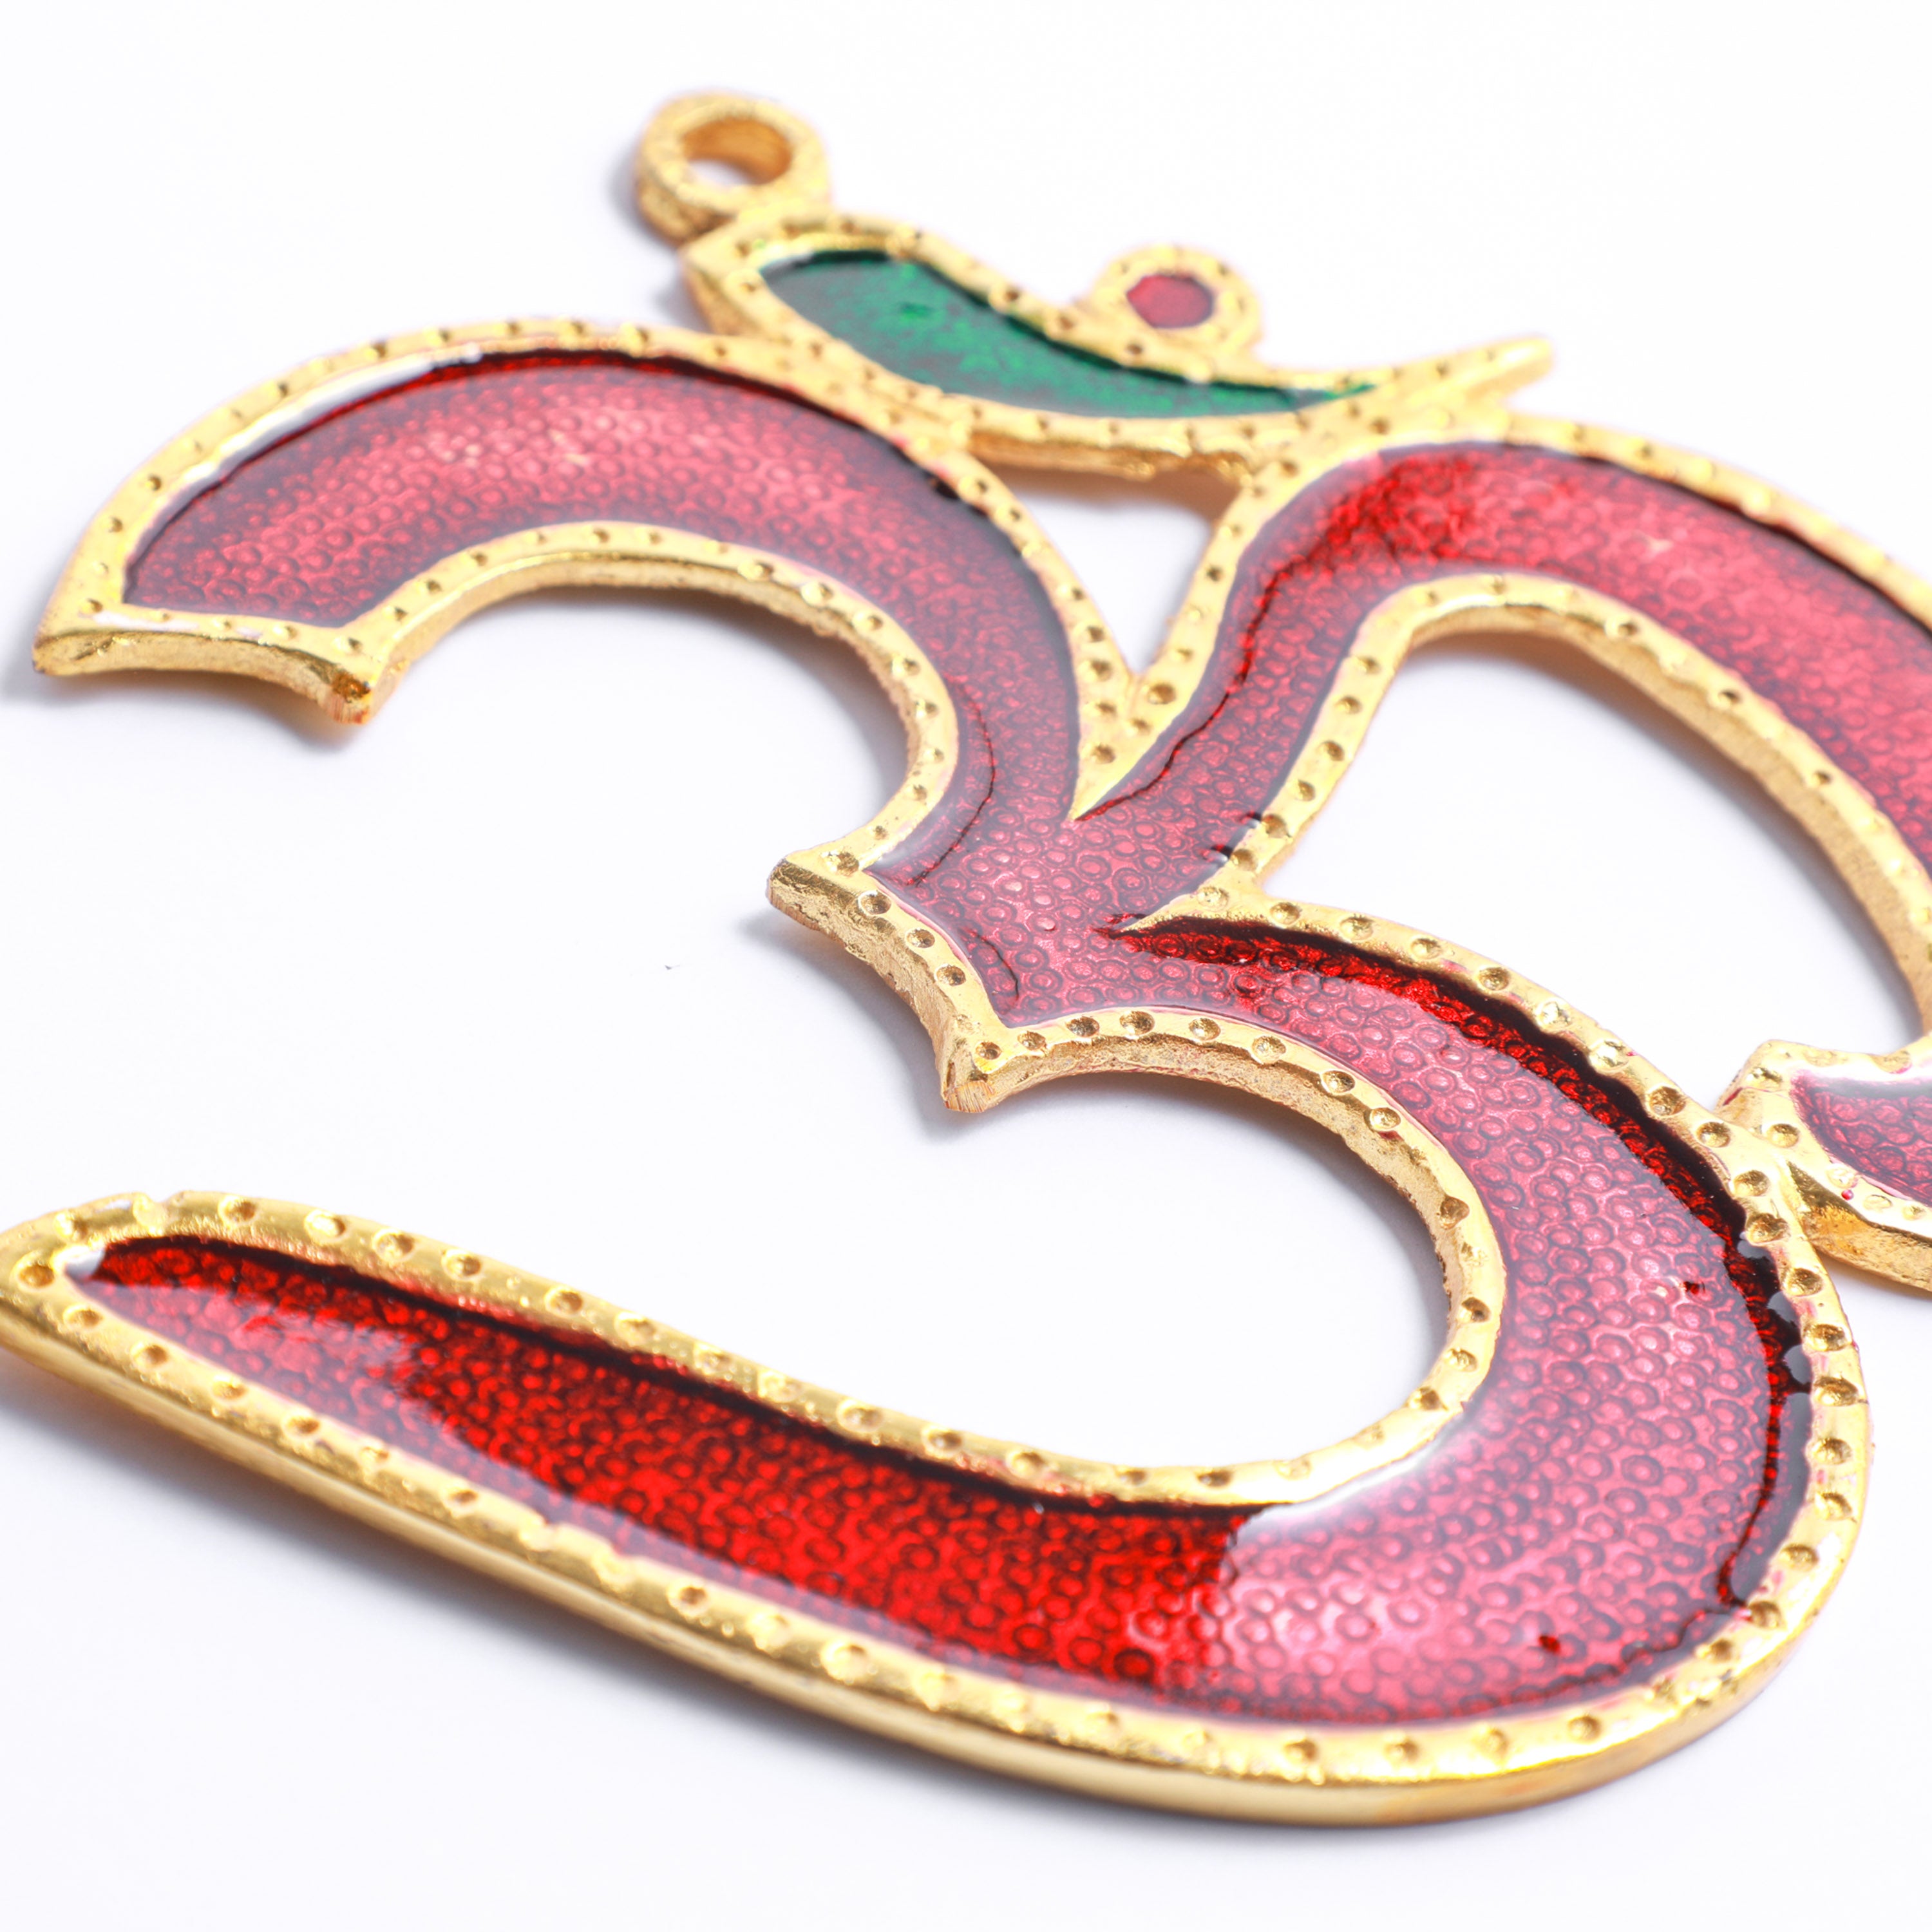 Classic OM pendant for home and pooja room decor